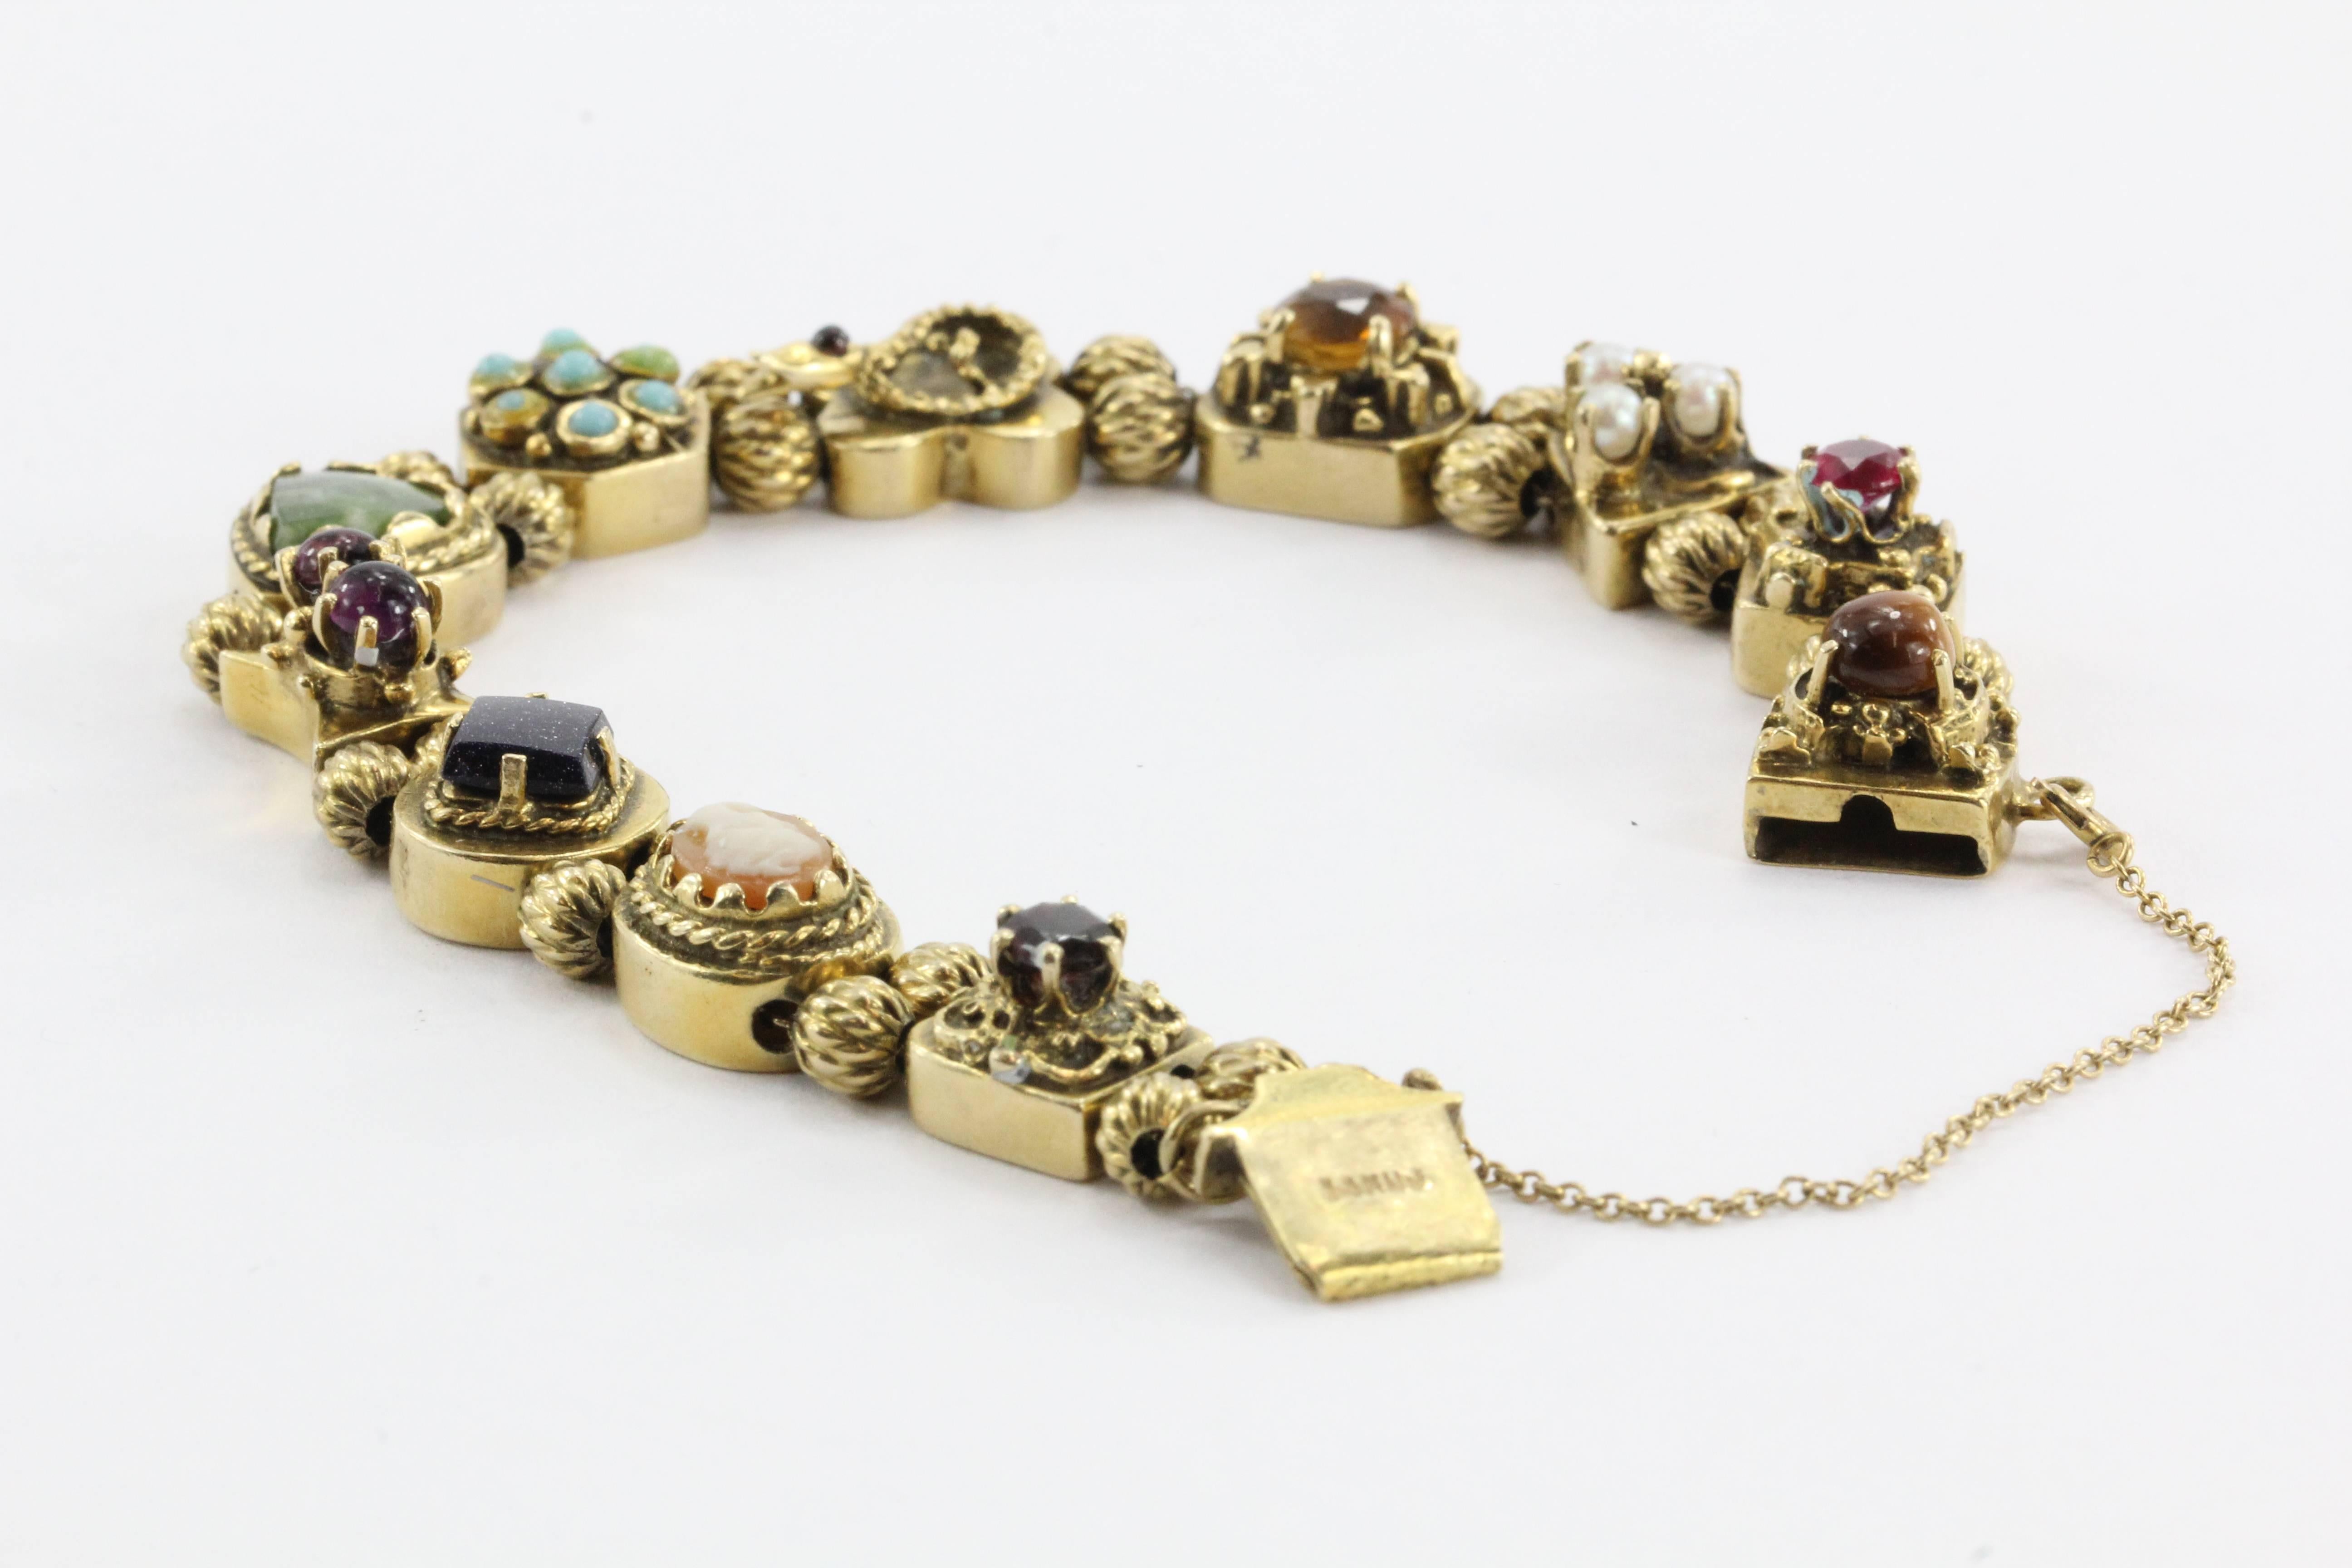 The piece comes loaded with antique gold slides. Both sides of the bracelet are all signed and hallmarked 14K UJ. The clasp has a round tiger's eye bead on it. The rest of the bracelet consists of a ruby slide, a seed pearl slide, a citrine slide, a